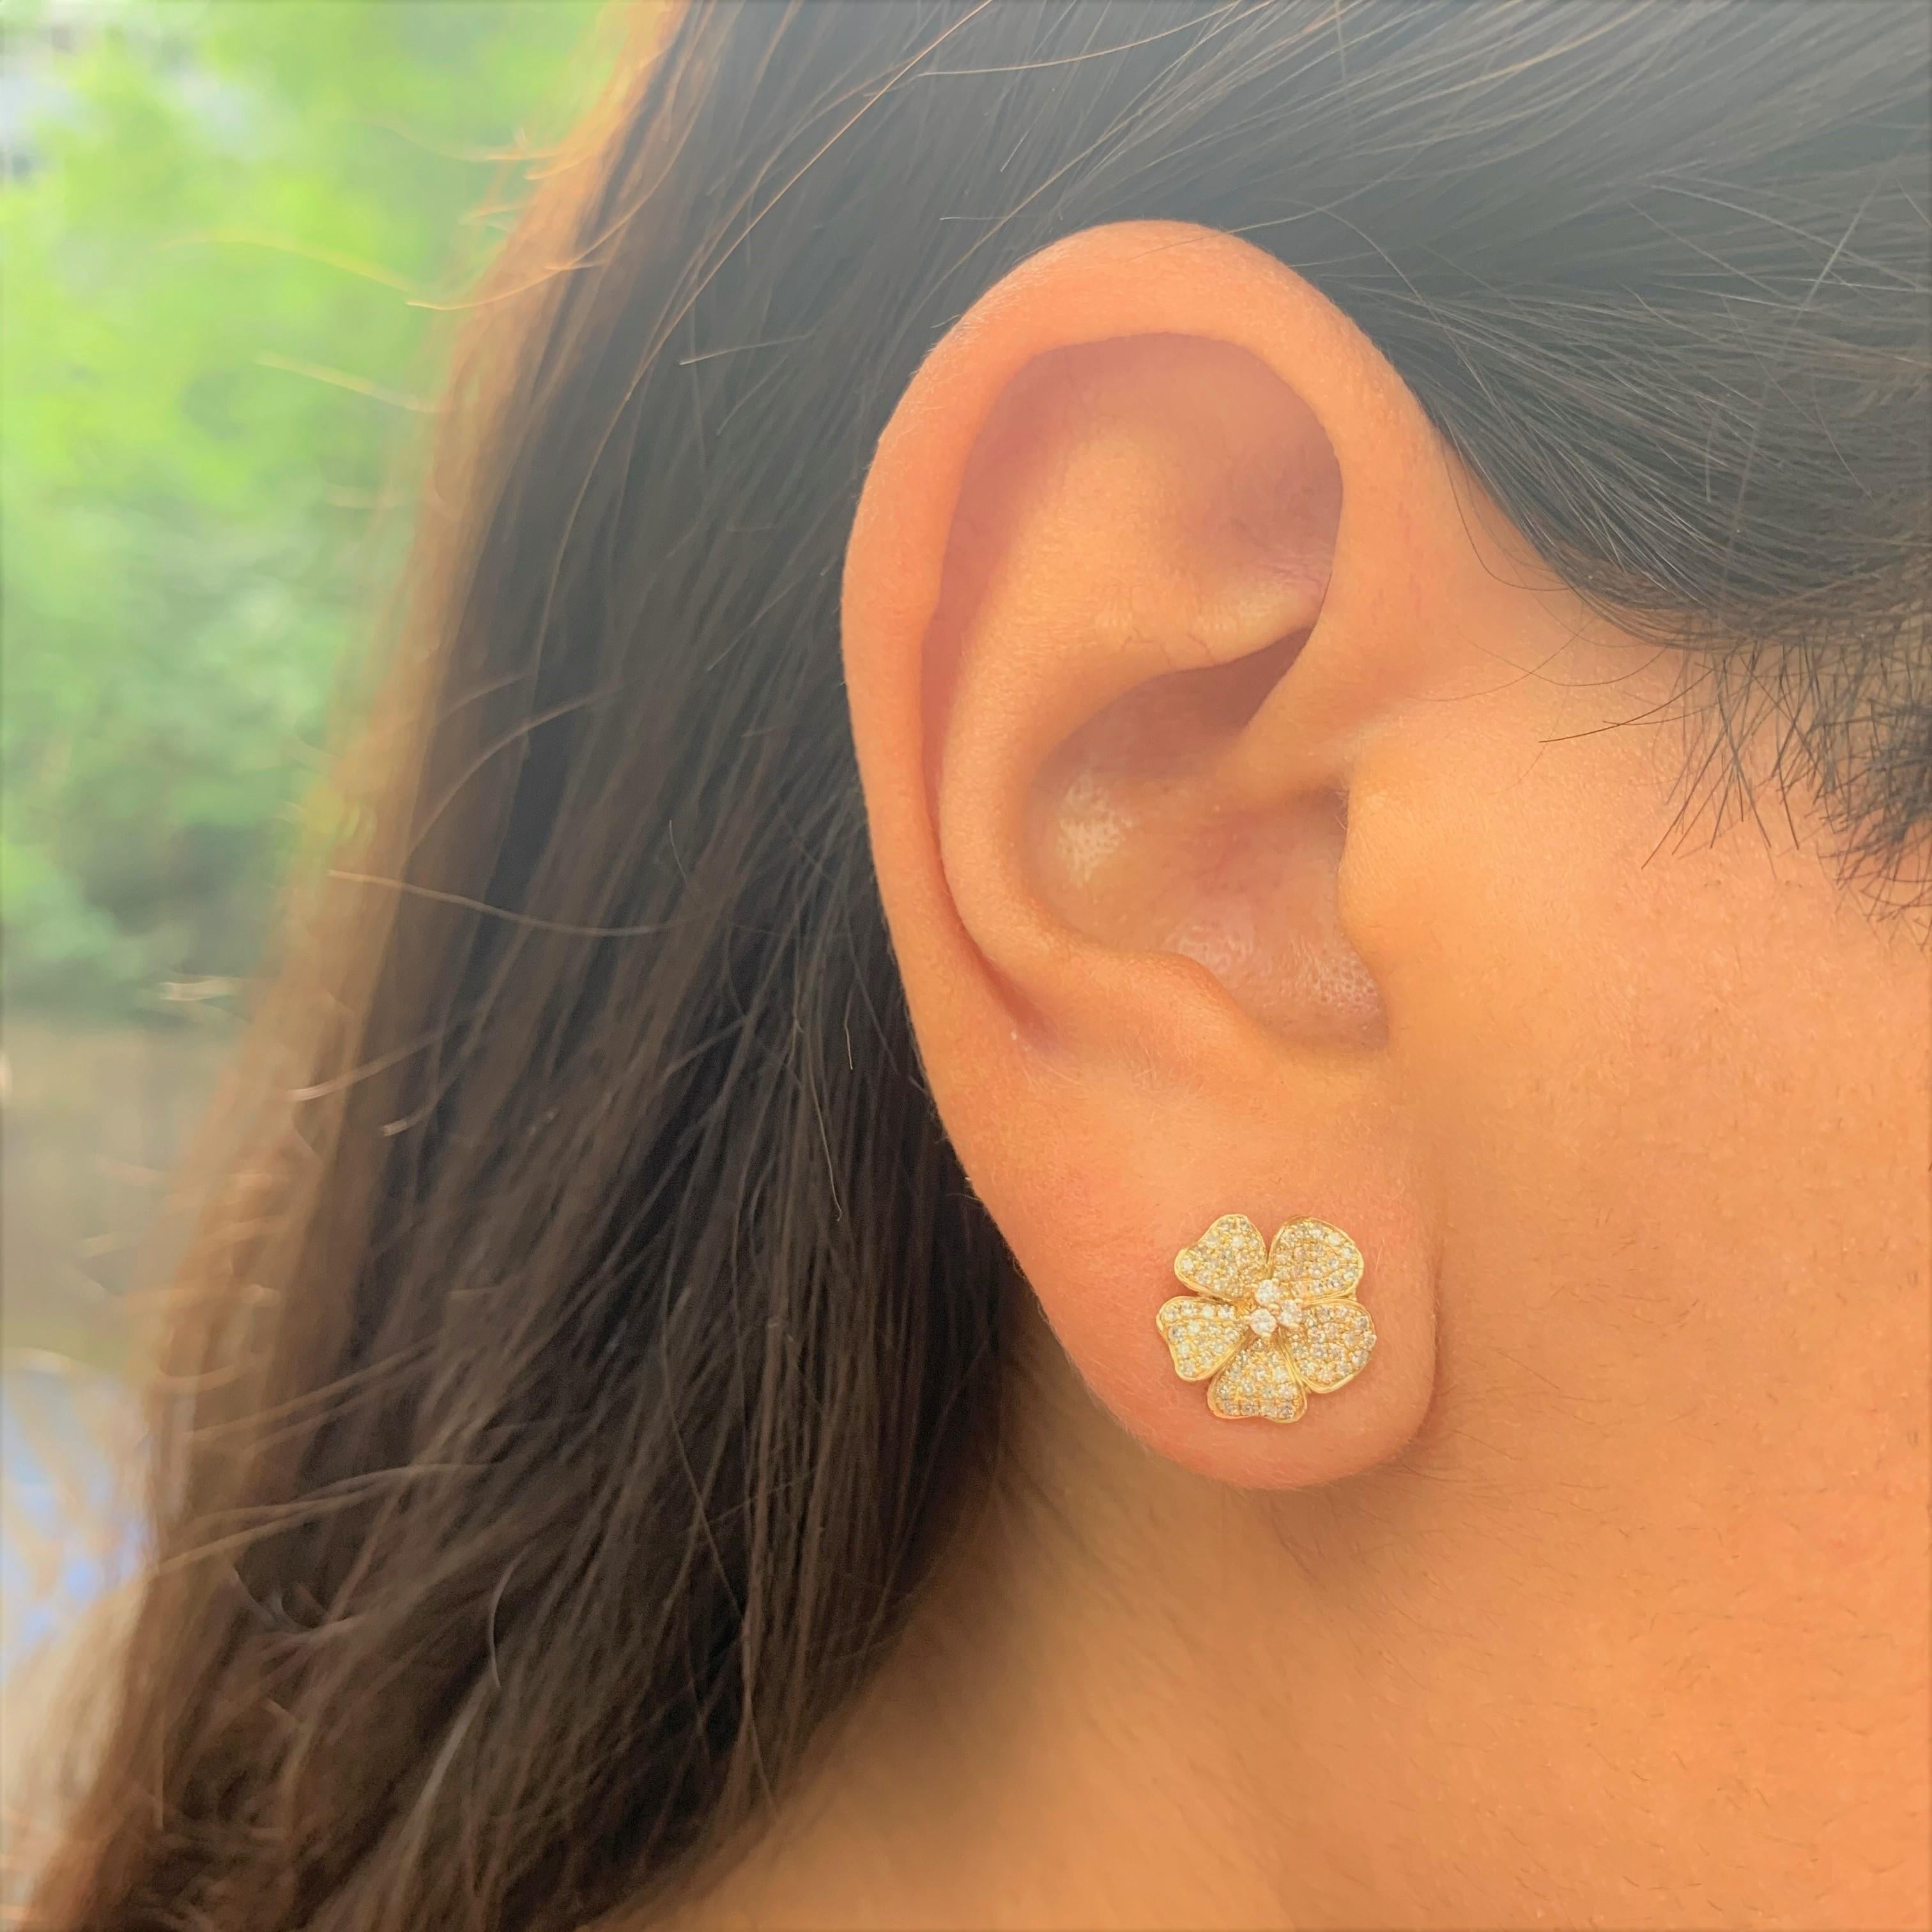 Add these beautiful Flower Stud Earrings to your look! Crafted of 14K Gold these earrings feature 0.32 carats of Natural Round White Diamonds and are secured with butterfly Pushbacks.
-14K Gold
-0.32 carats of Round Natural White Diamonds
-Color &